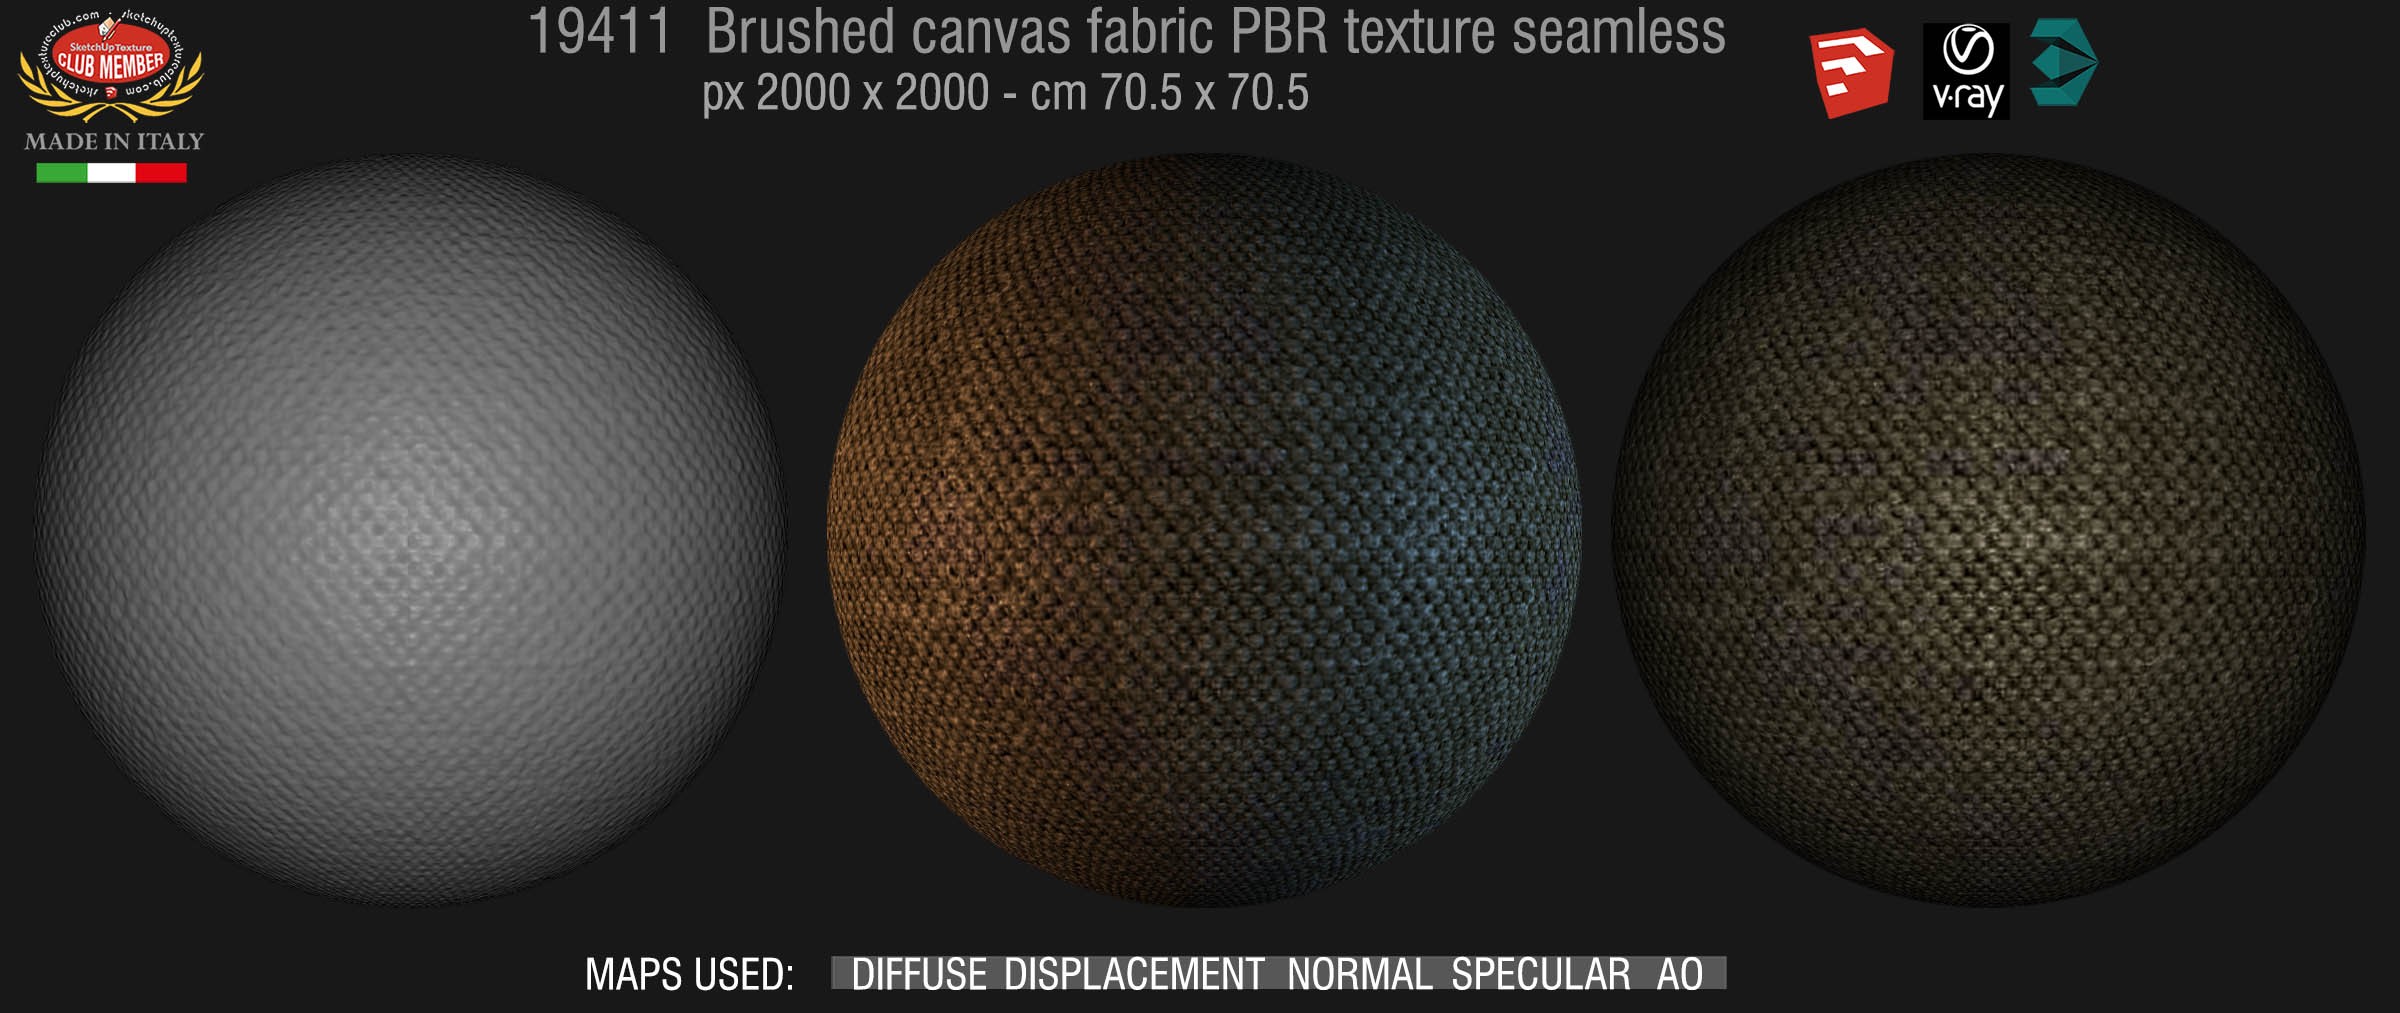 19411 Brushed canvas fabric PBR texture seamless DEMO